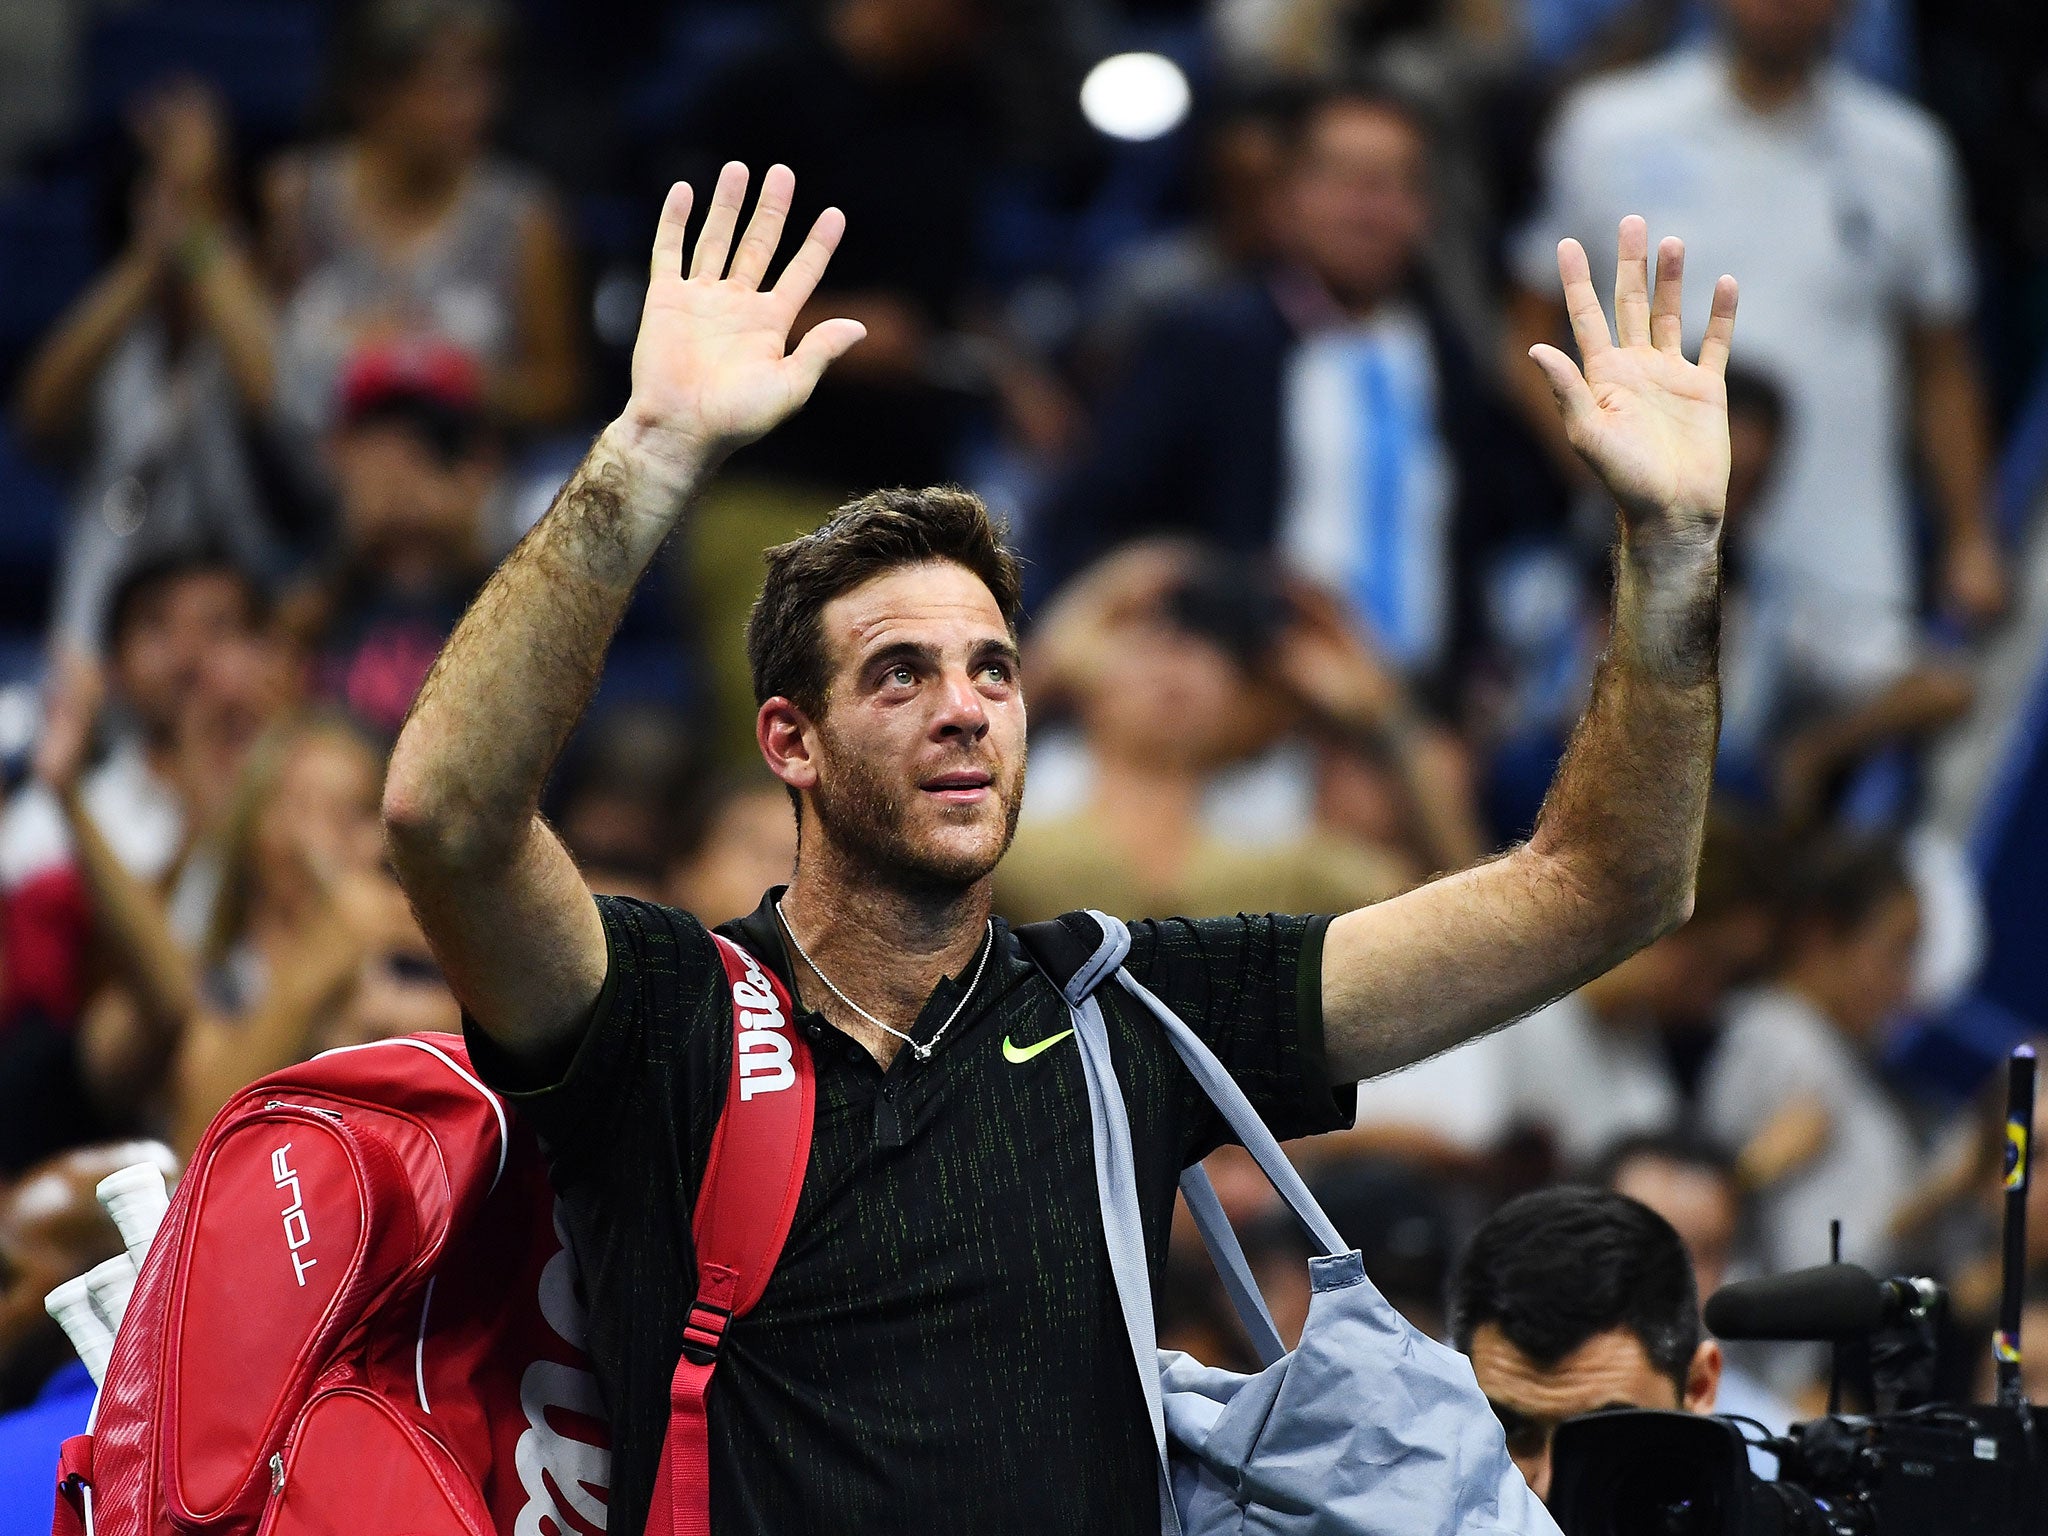 &#13;
Del Potro is on the road to recovery from his two-year absence &#13;